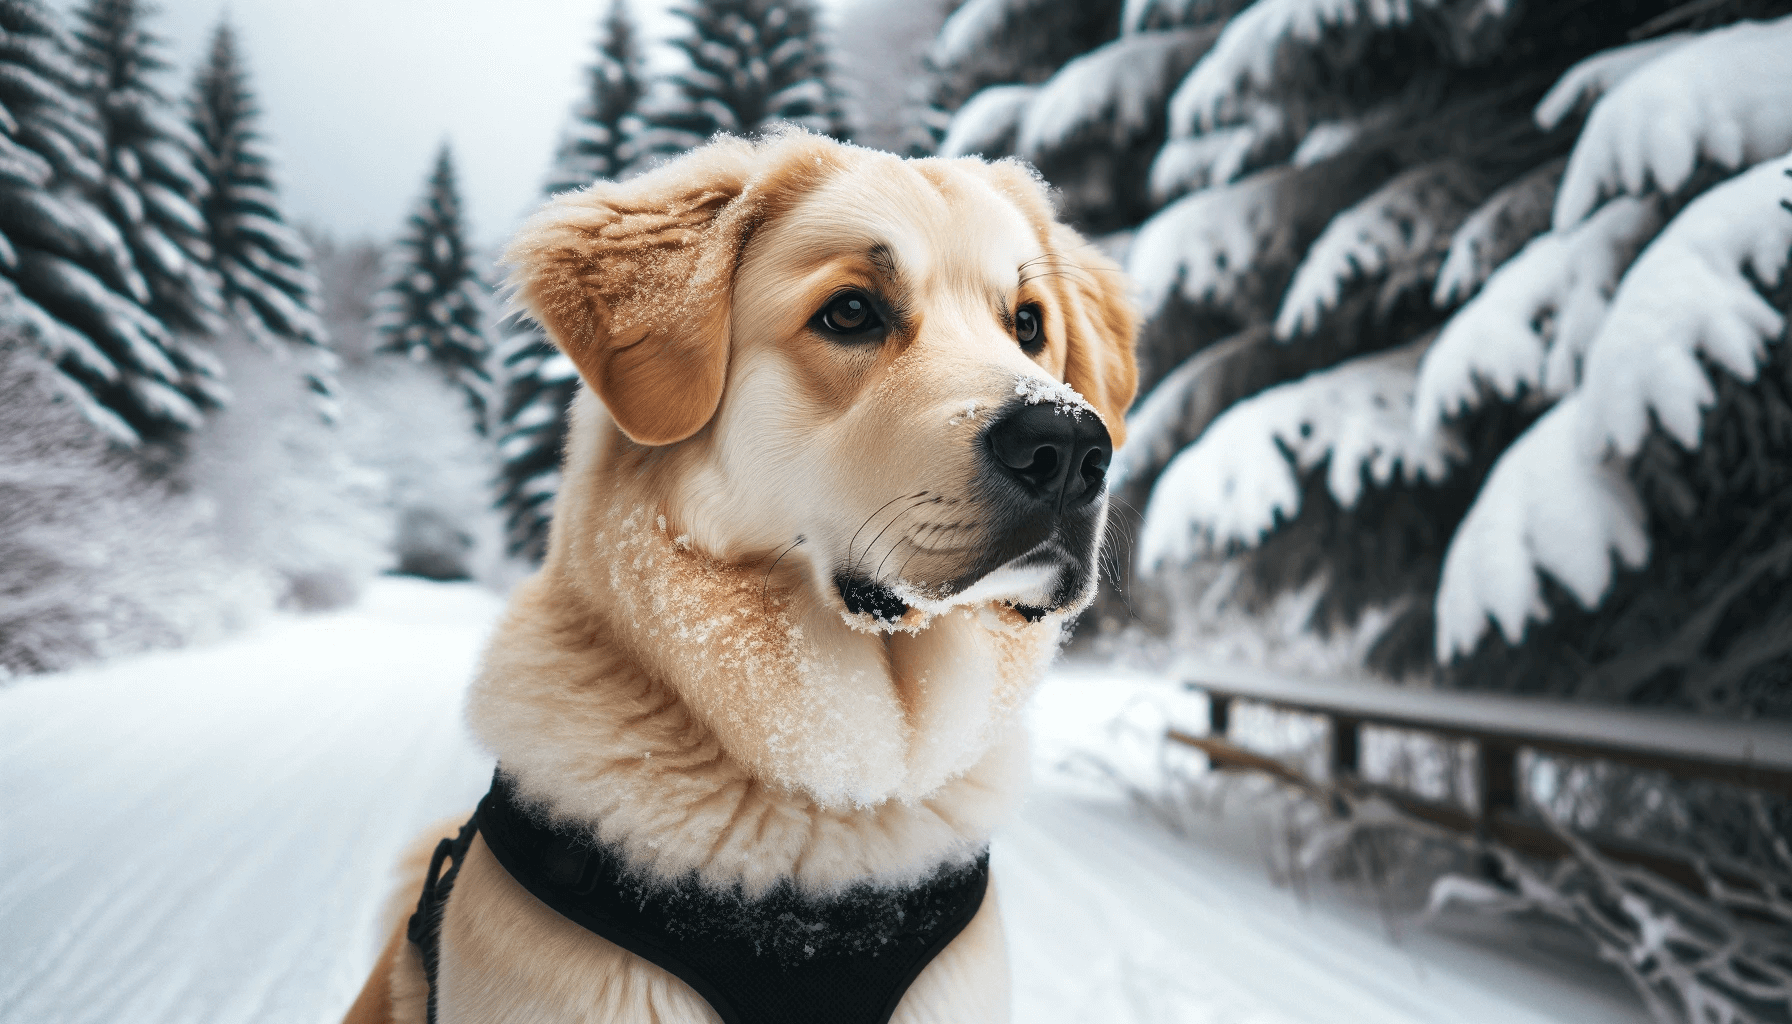 Pyrenees Lab Mix dog with a light golden coat standing in a snowy landscape. The dog is looking to the side with a focused gaze, and there's a ligh